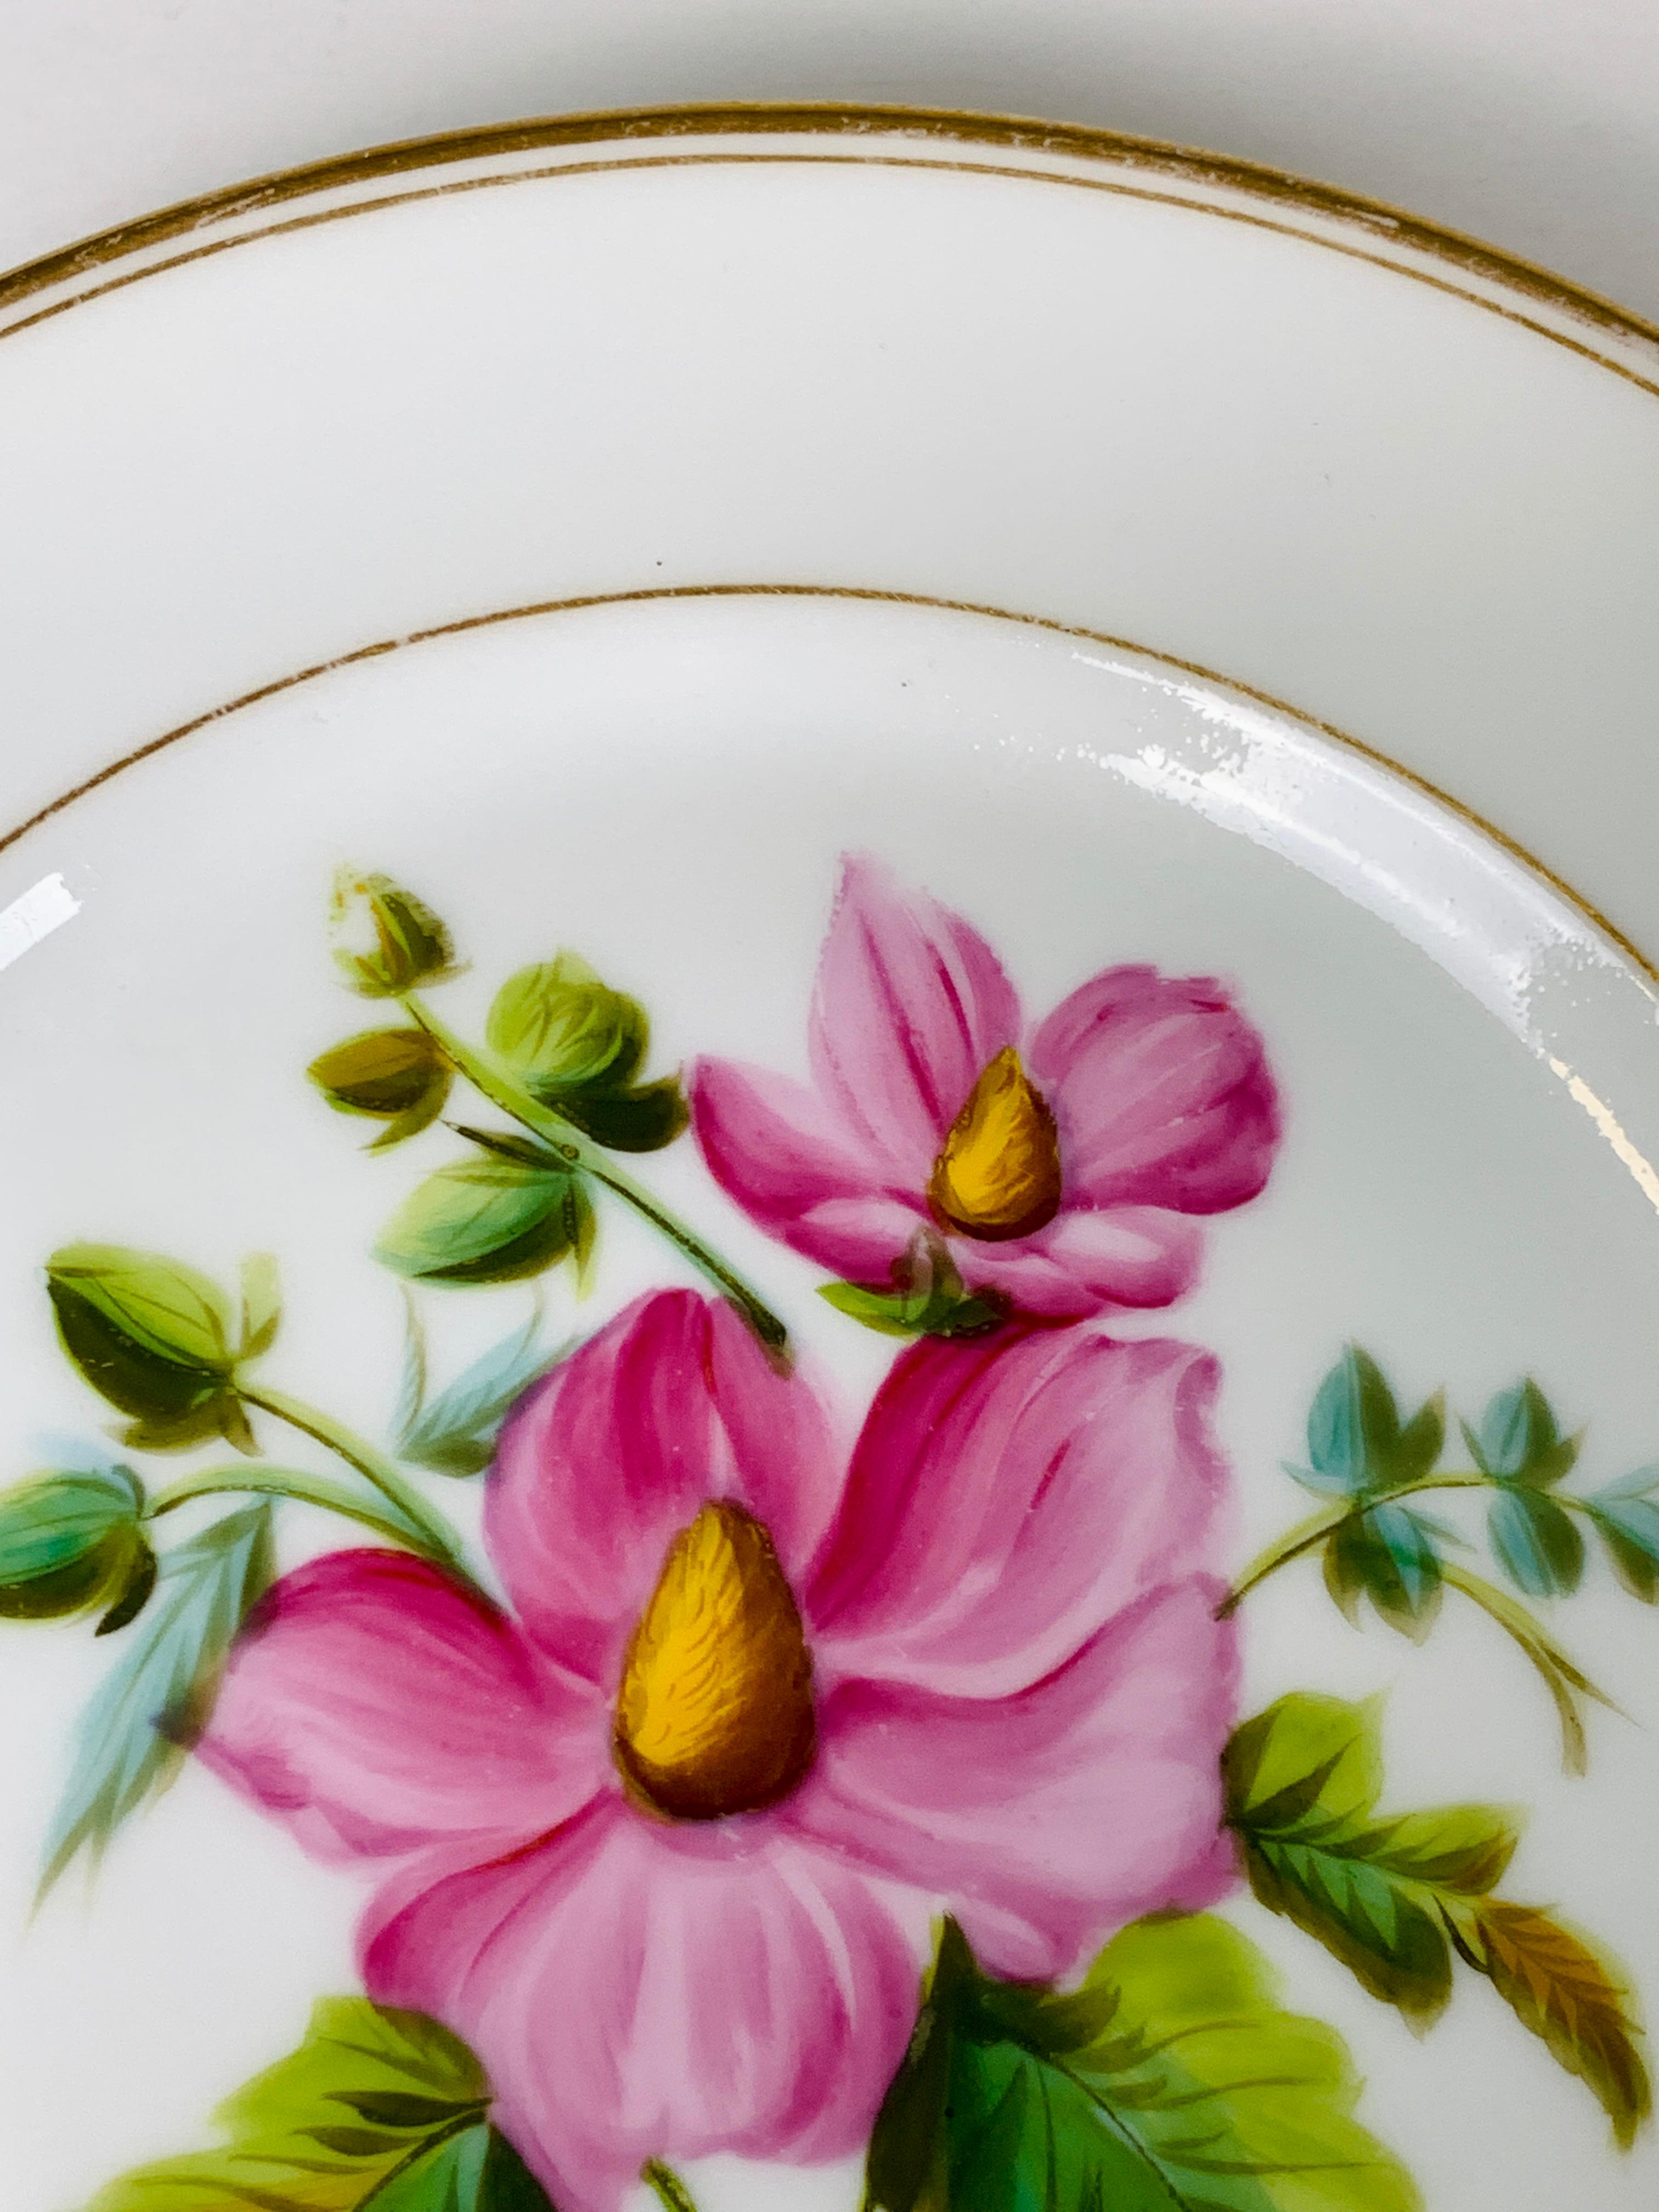 Napoleon III Pair of Paris Porcelain Botanical Dishes Painted by Feuillet, Circa 1850 For Sale